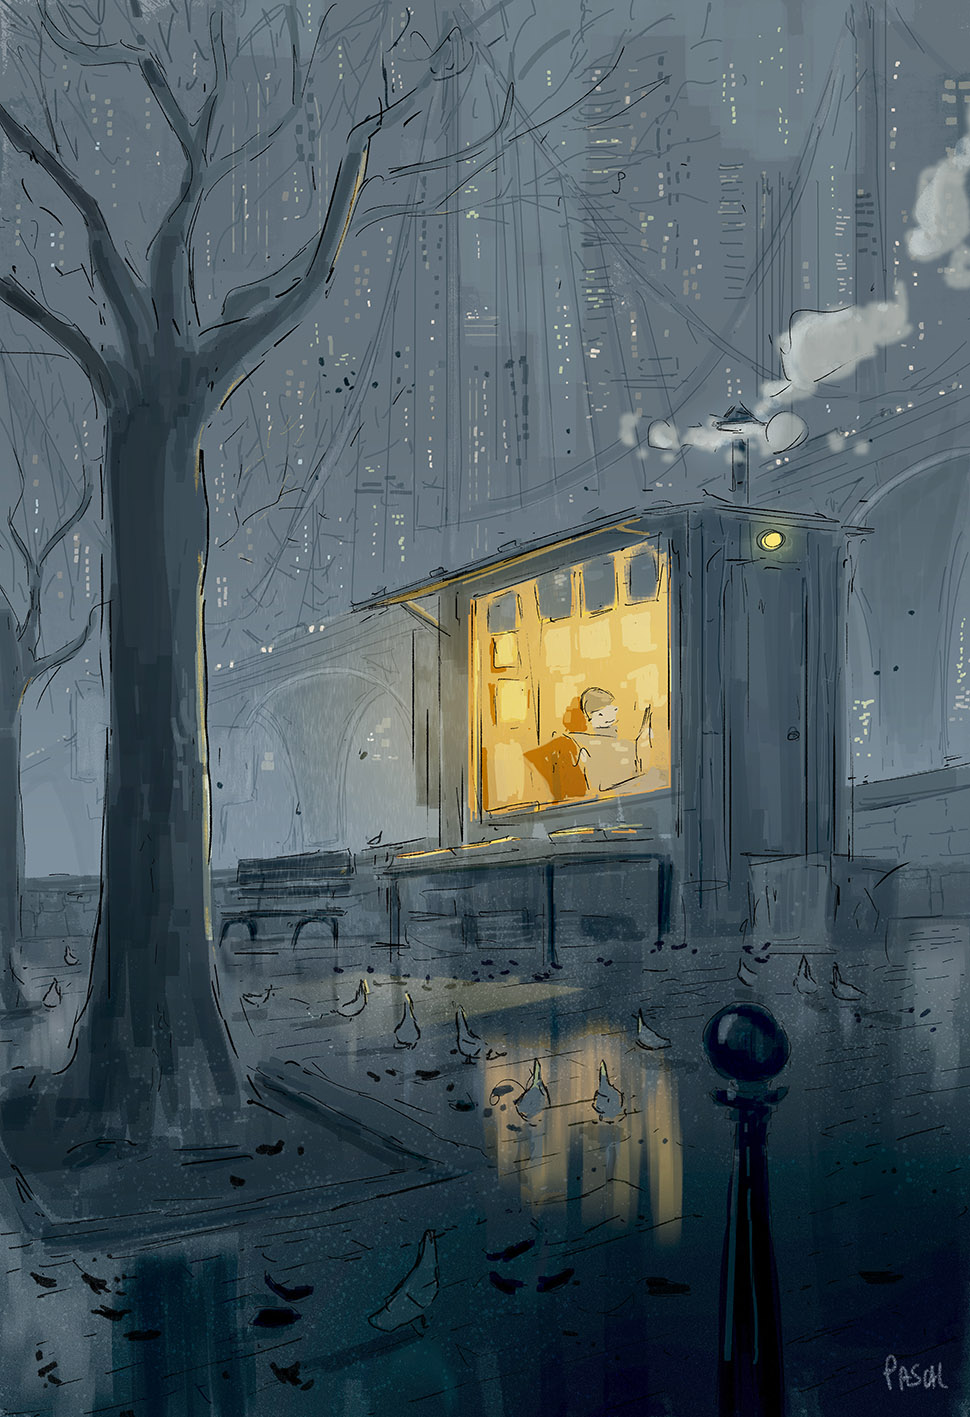 pascal campion: Reading Weather.